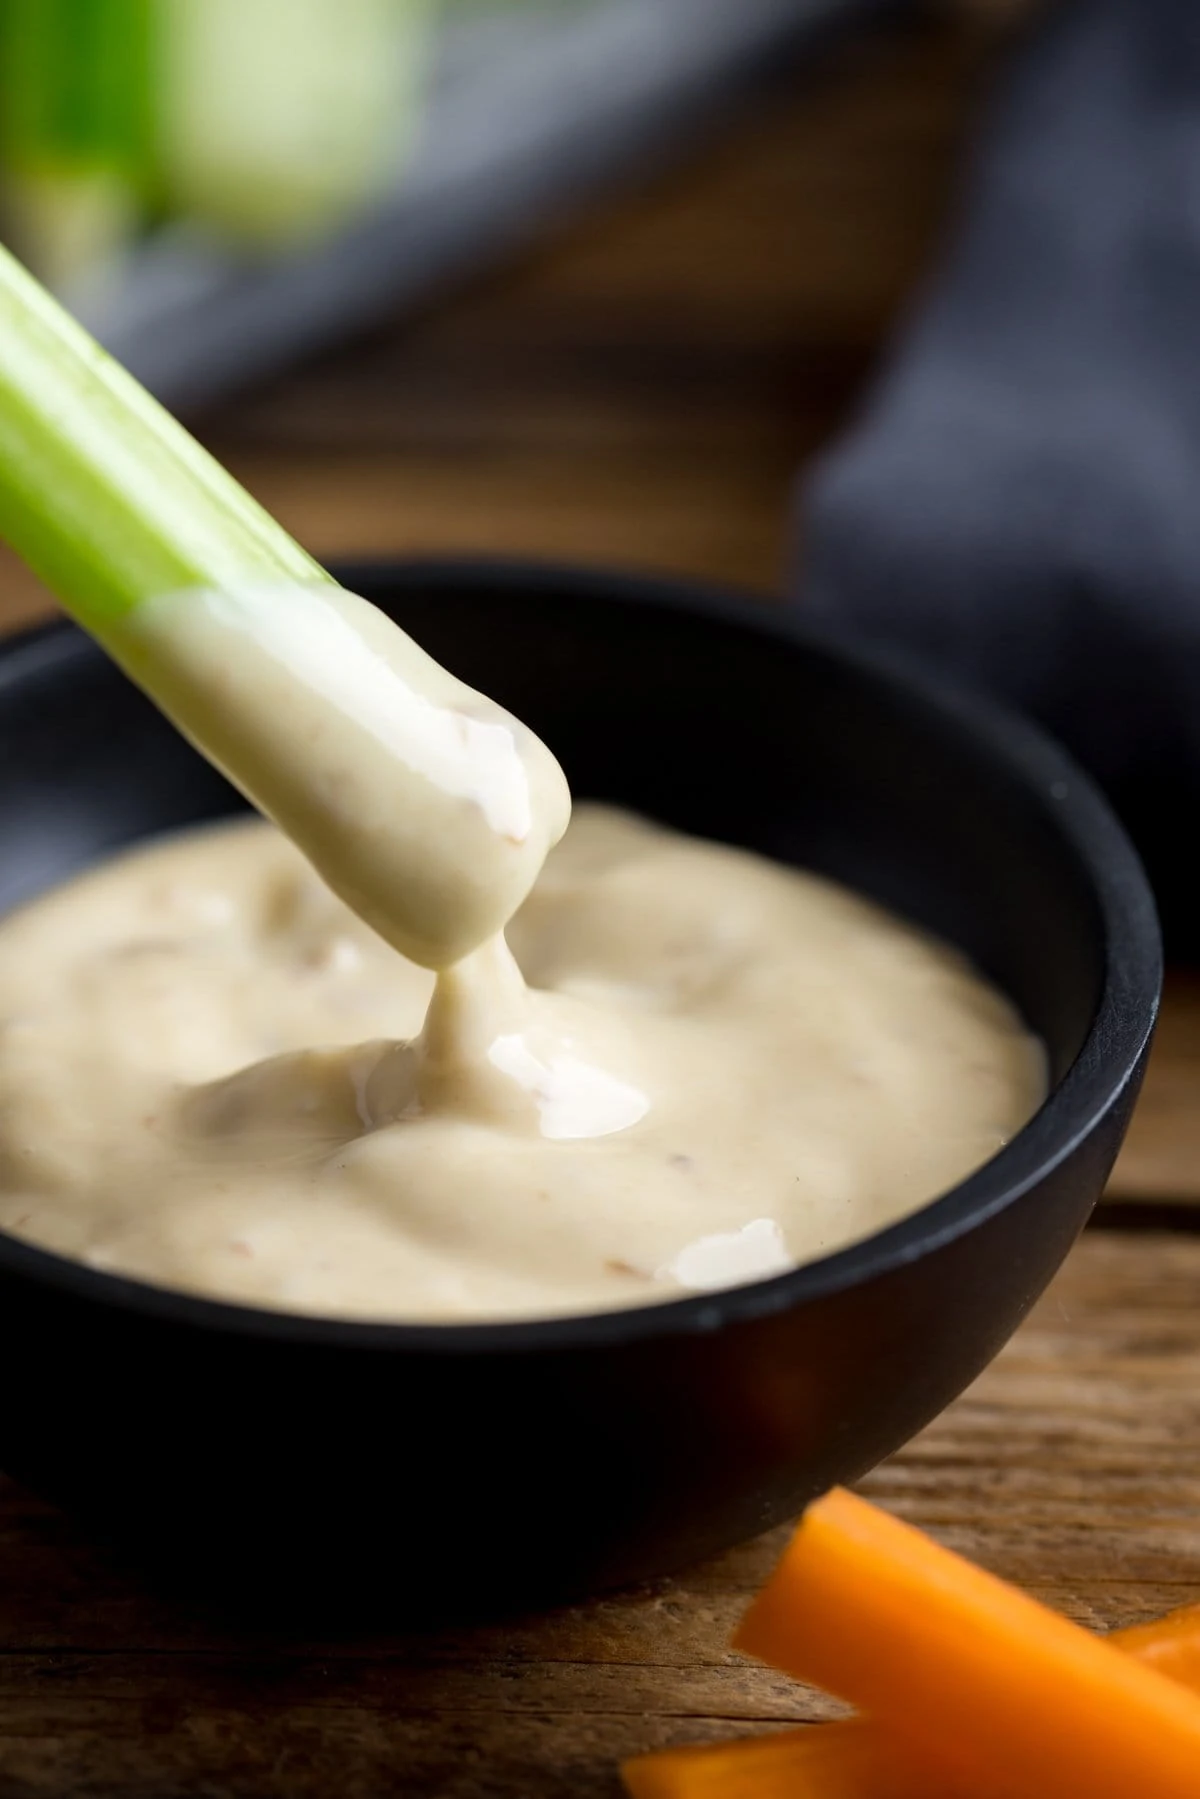 Piece of celery being dipped into a bowl of salad cream